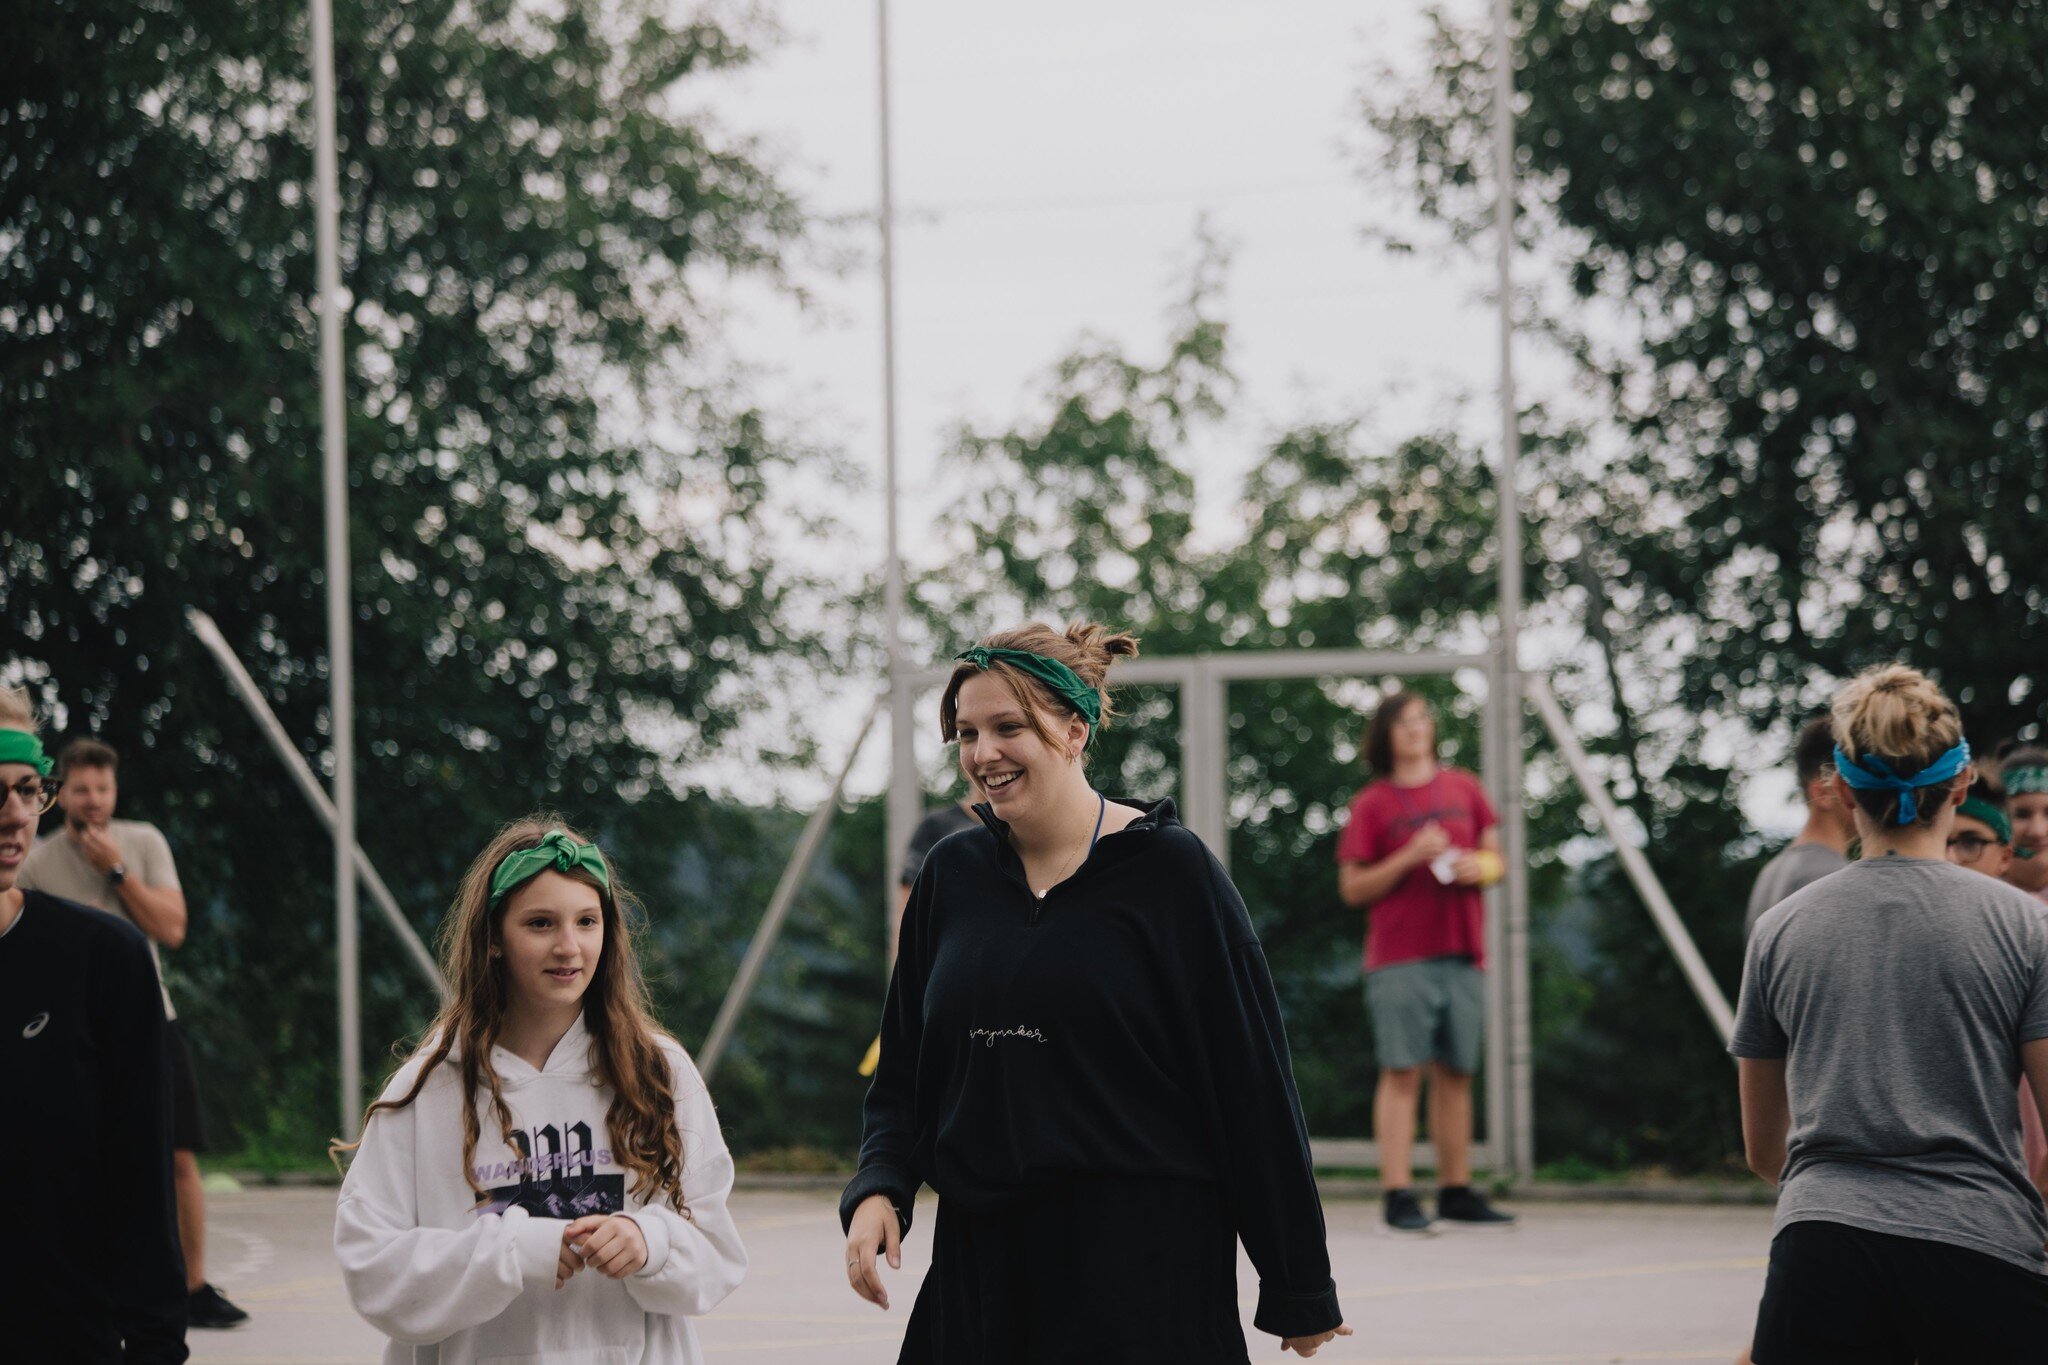 Kallie &ndash; I like camp because it is a welcoming community and I can come and be myself. It gives me a chance to learn more about God and how to love others better. If I'd have to convince you to come in one sentence I'd say: camp is a place to l